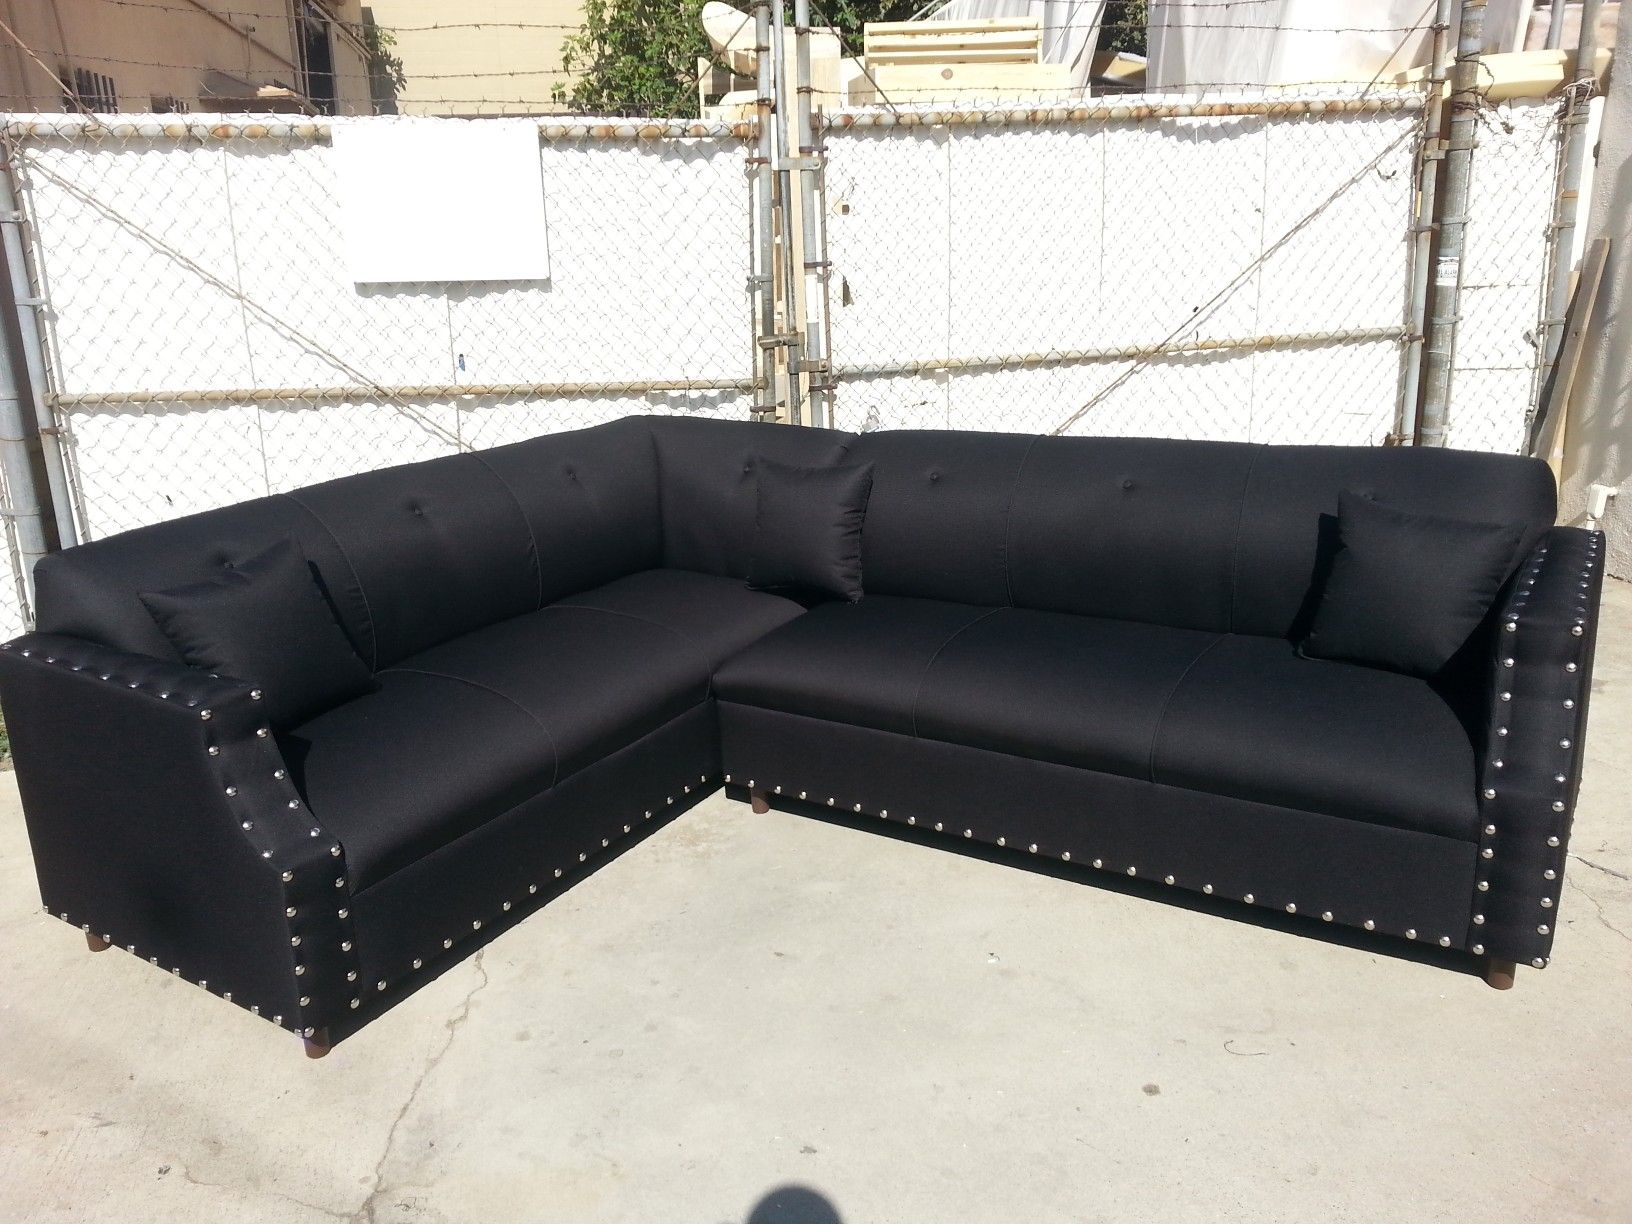 NEW 7X9FT DOMINO BLACK FABRIC SECTIONAL COUCHES